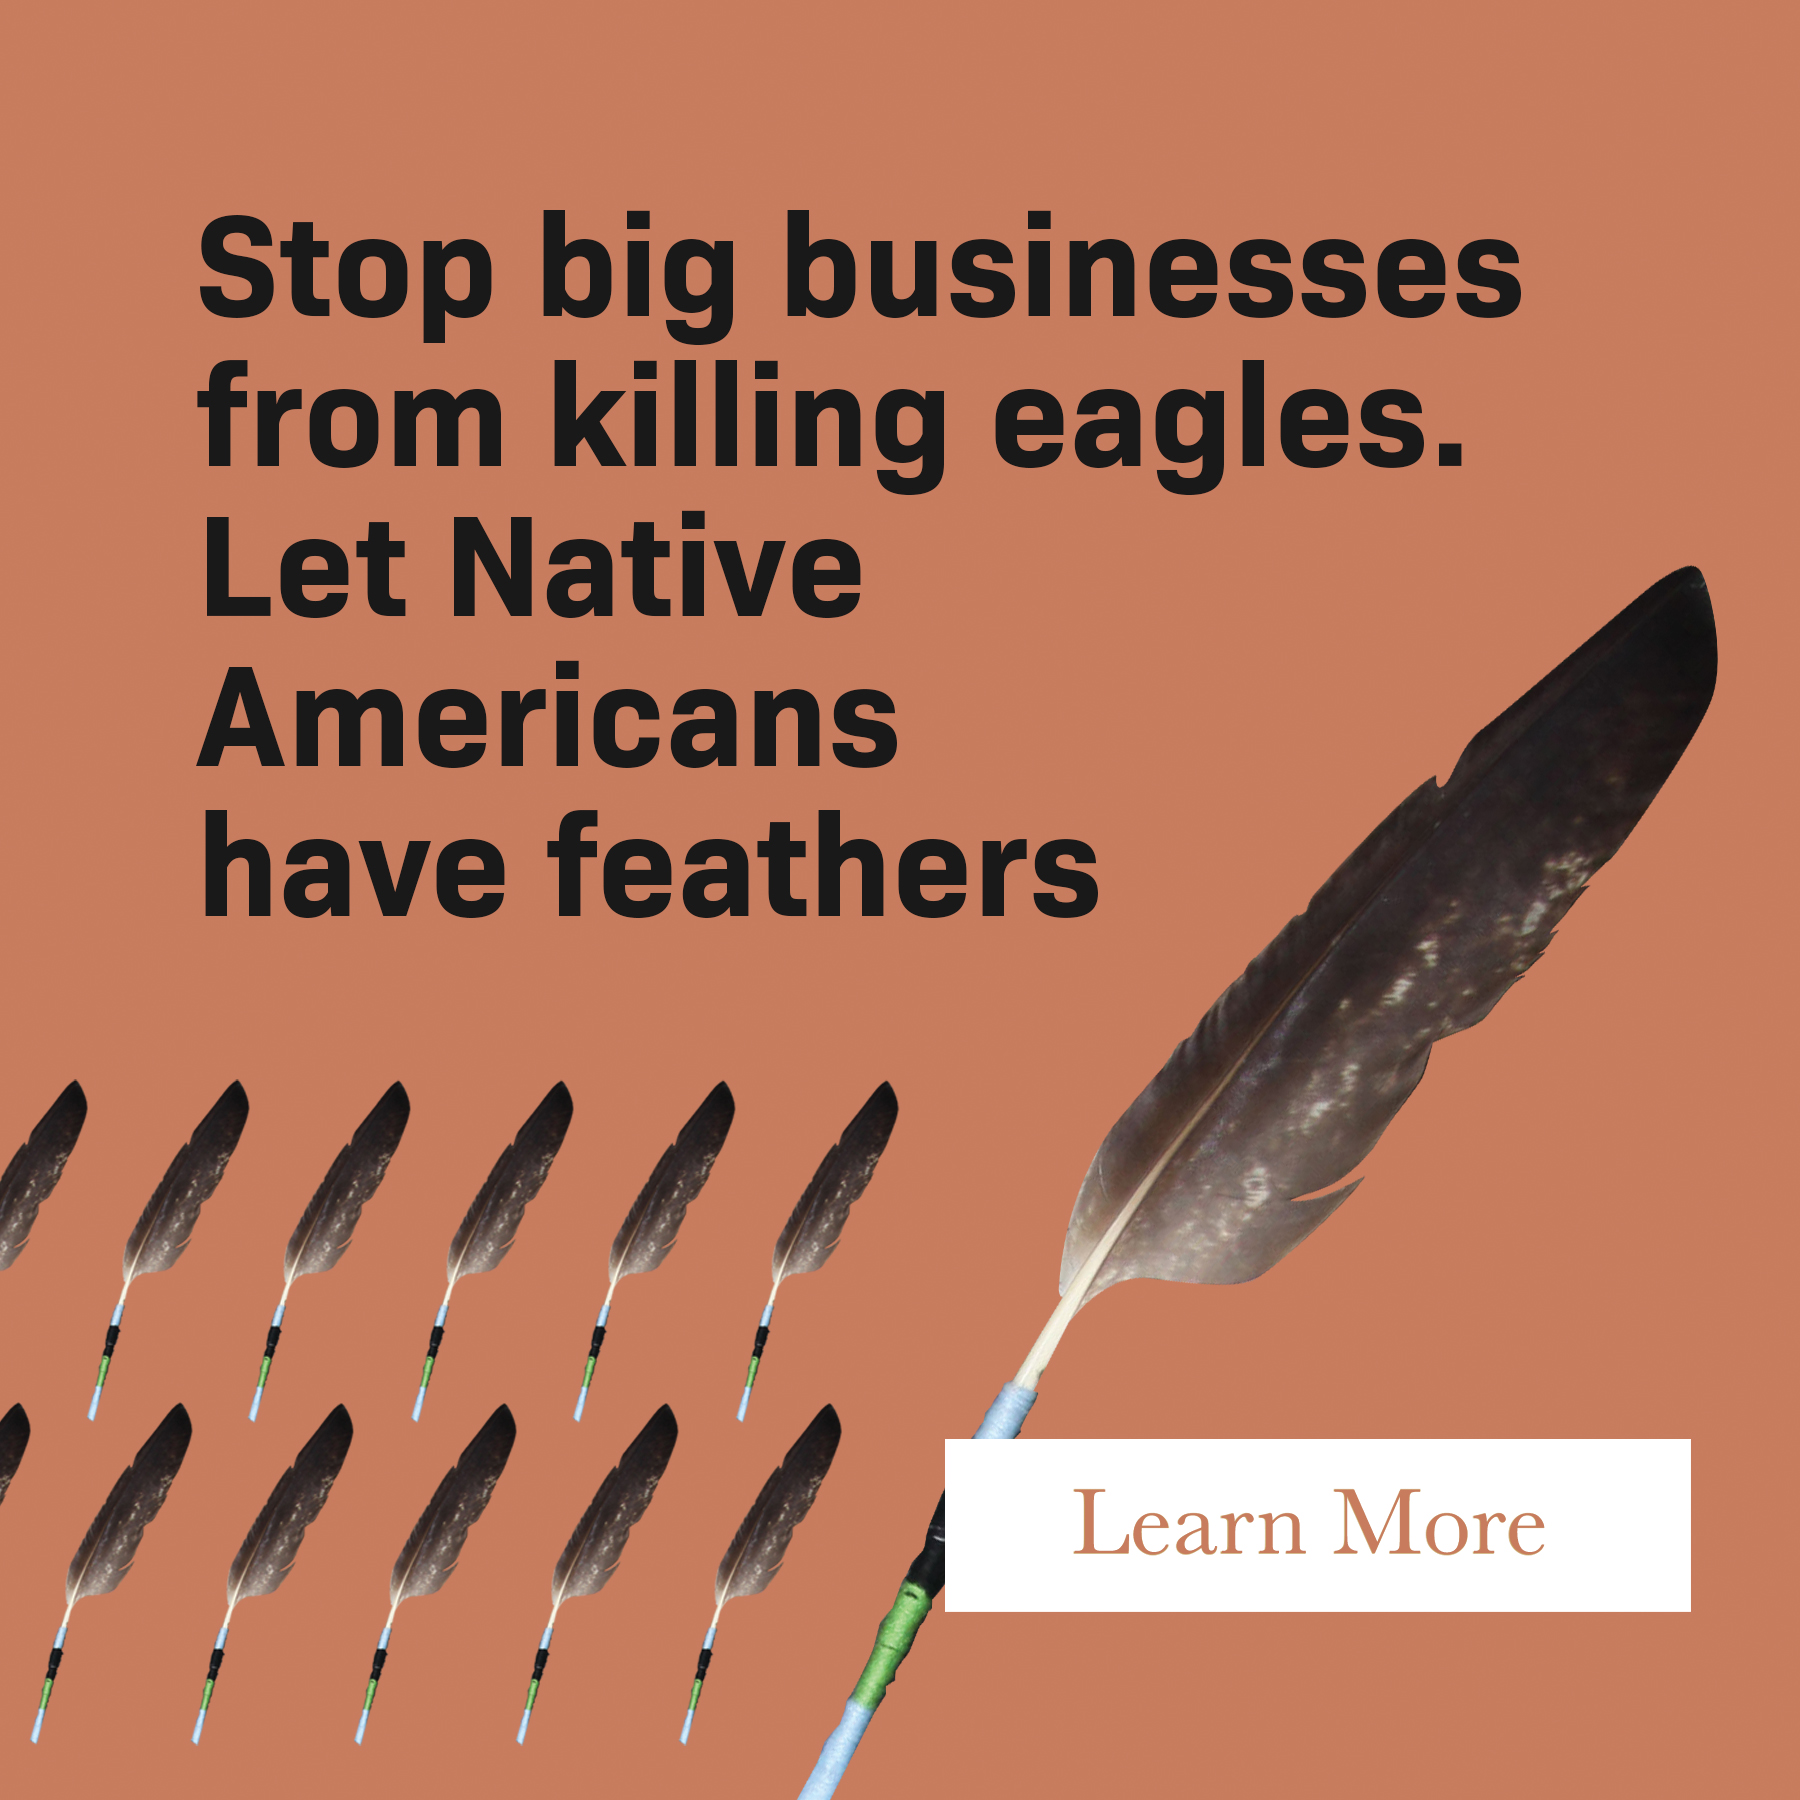 Let Native Americans have feathers